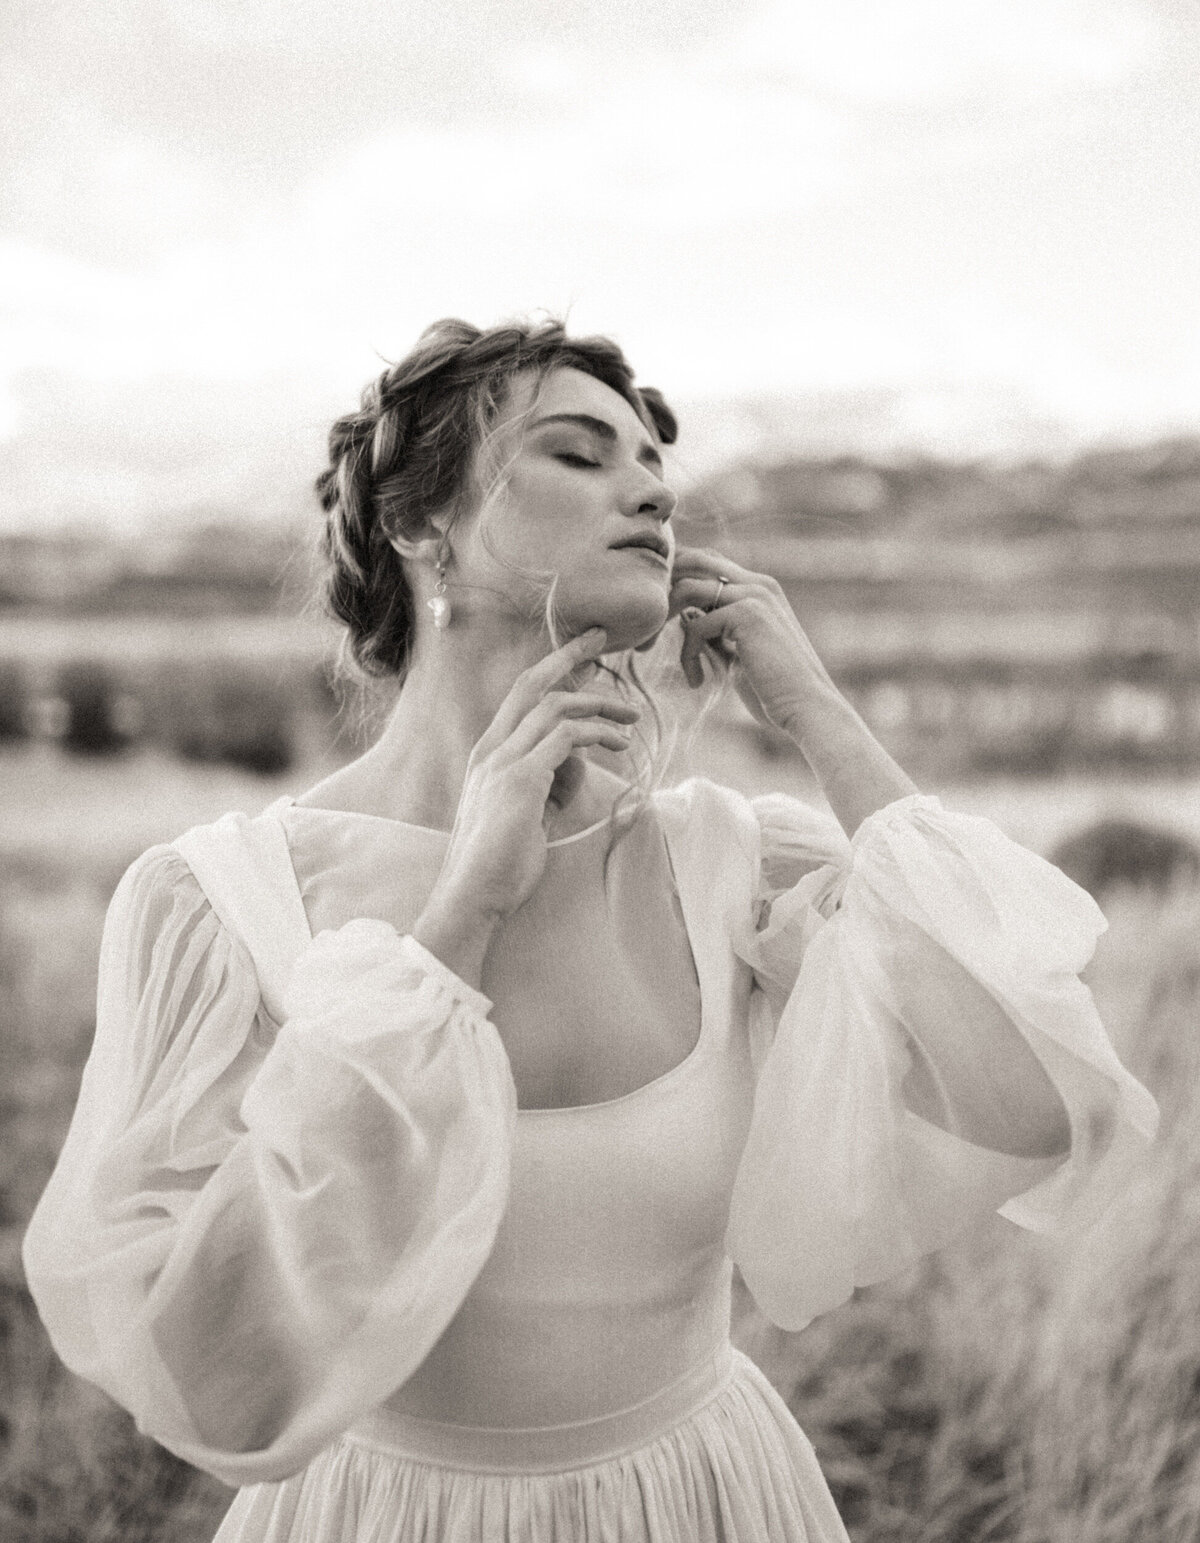 Bride with boho braided updo and puffy sleeves poses in wedding dress